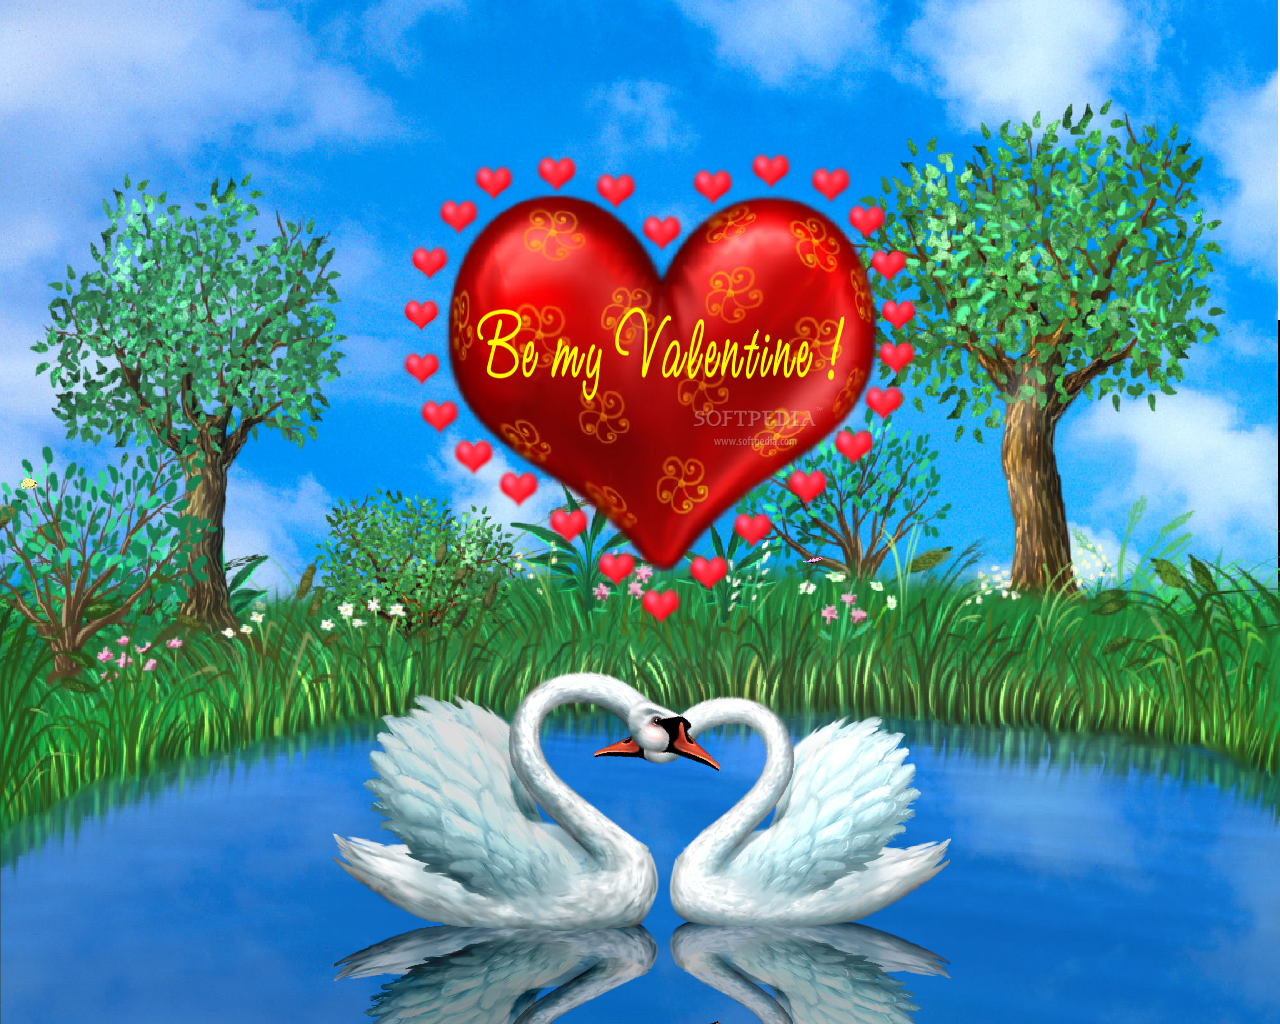 Beautiful Love Animated Screensaver This Is The Image Displayed By